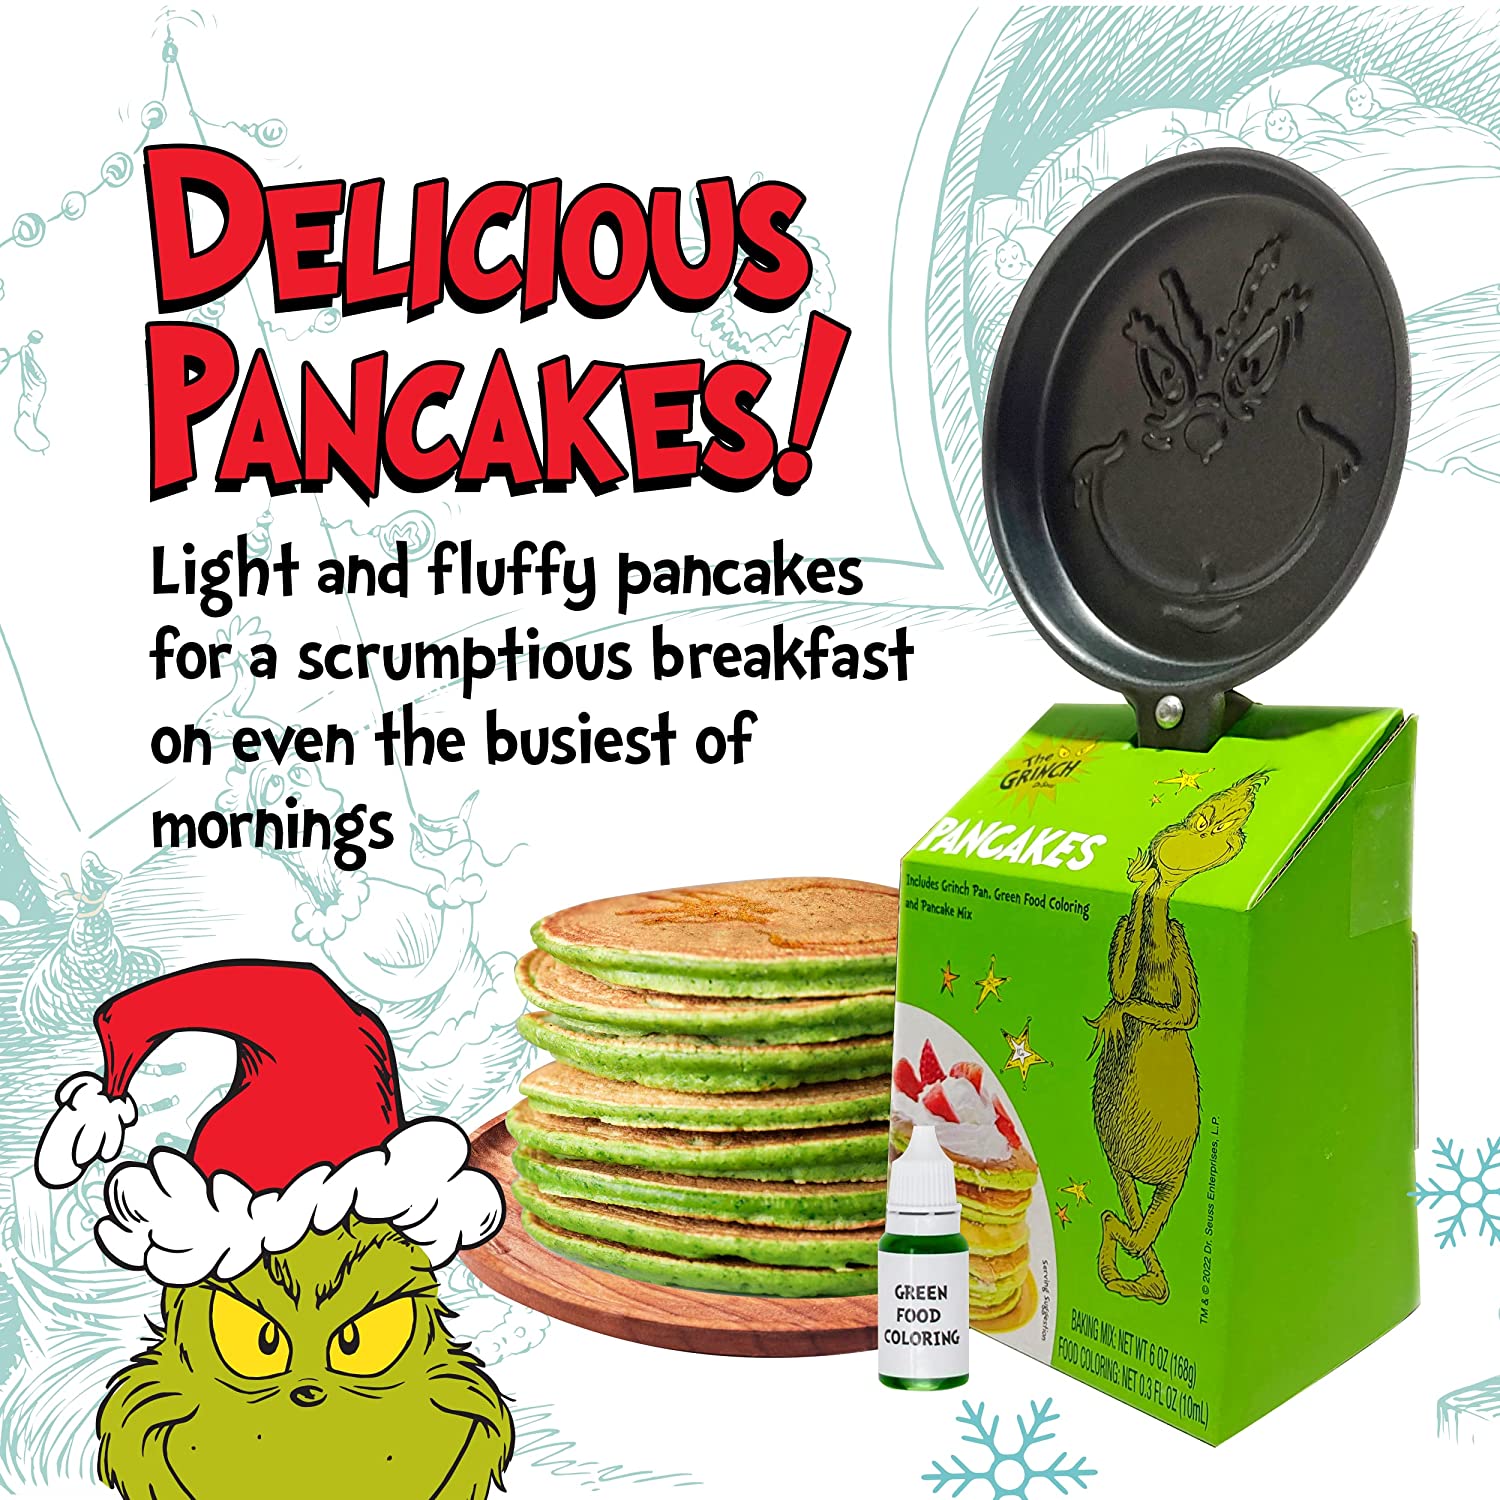 Grinch Pancakes – Ten Acre Gifts